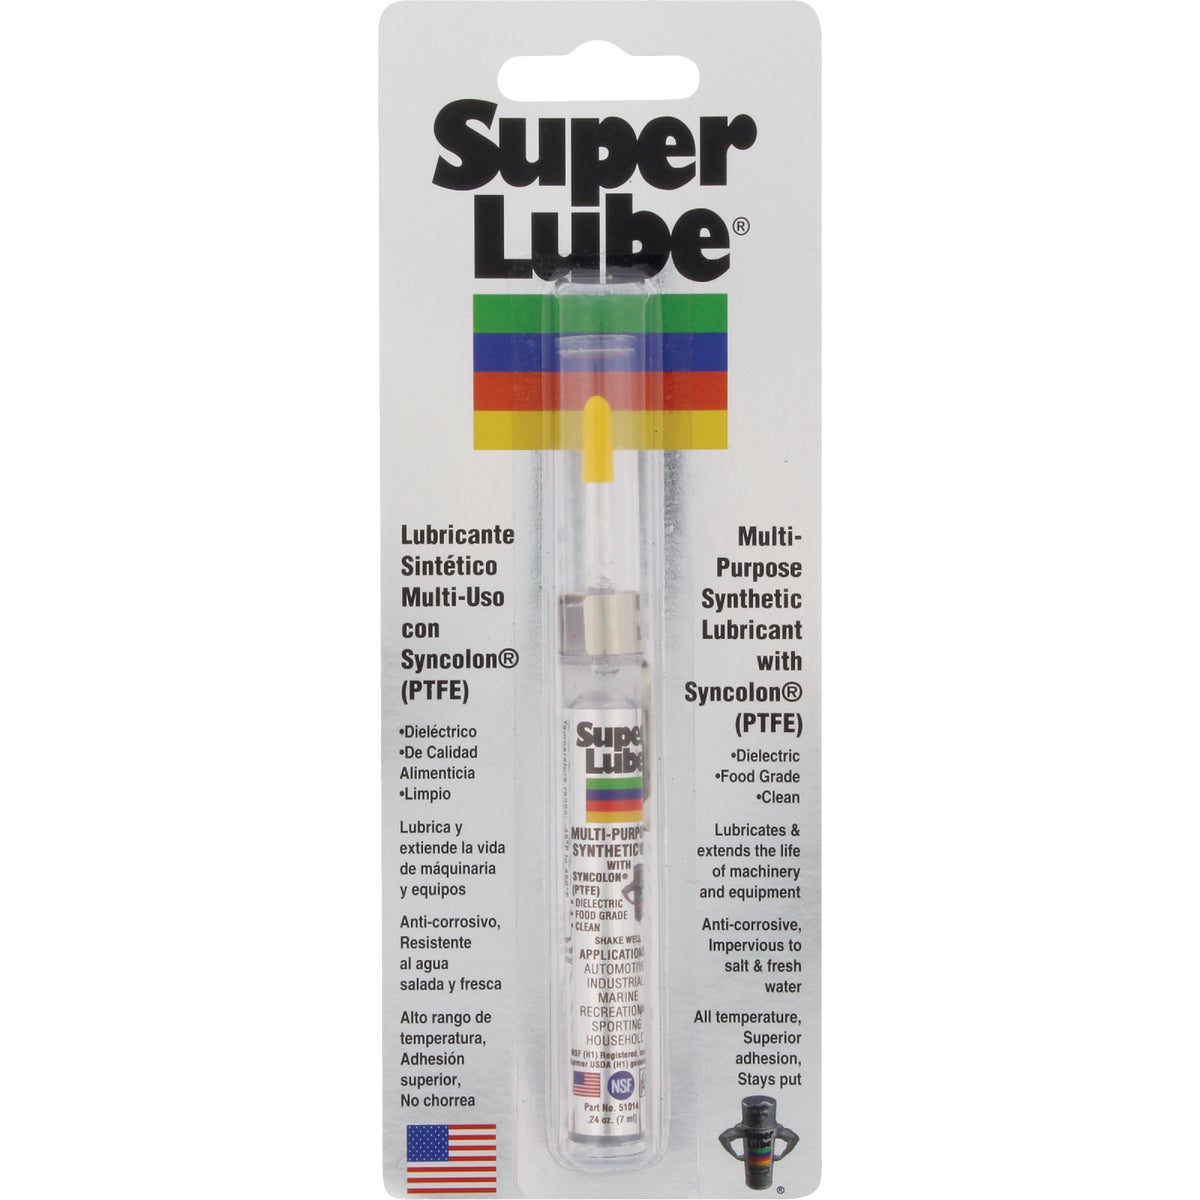 Item 580953, Synthetic heavy-duty, multipurpose lubricant with PTFE.